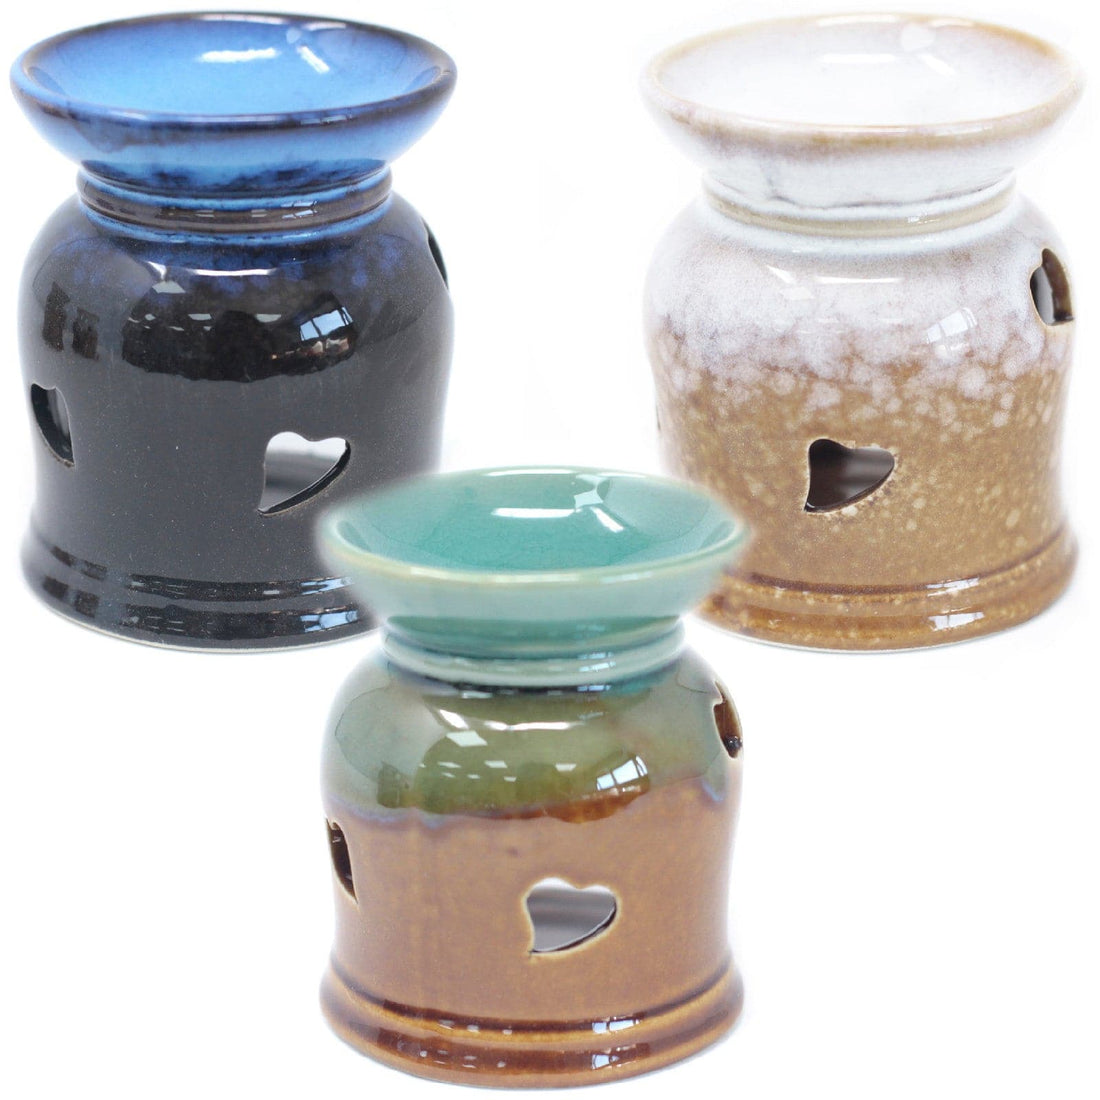 Classic Rustic Oil Burner - Heart Cut-out (assorted) - best price from Maltashopper.com OBCS-04DS